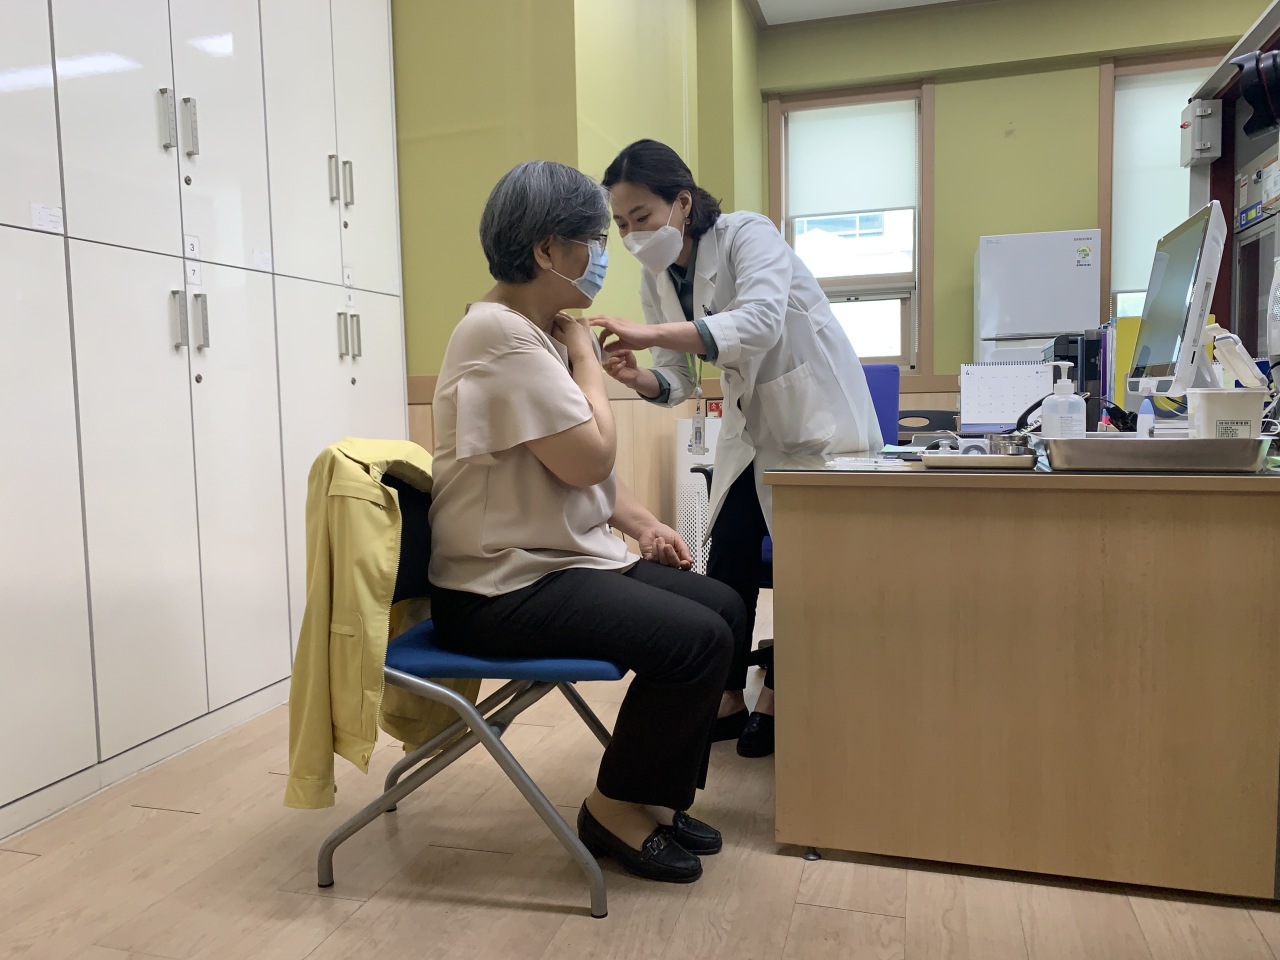 KDCA chief Jeong Eun-kyeong receives her first AstraZeneca COVID-19 shot on April 1 at a public health center in Cheongju, a North Chungcheong Province city where the agency is headquartered. (Kim Arin/The Korea Herald)